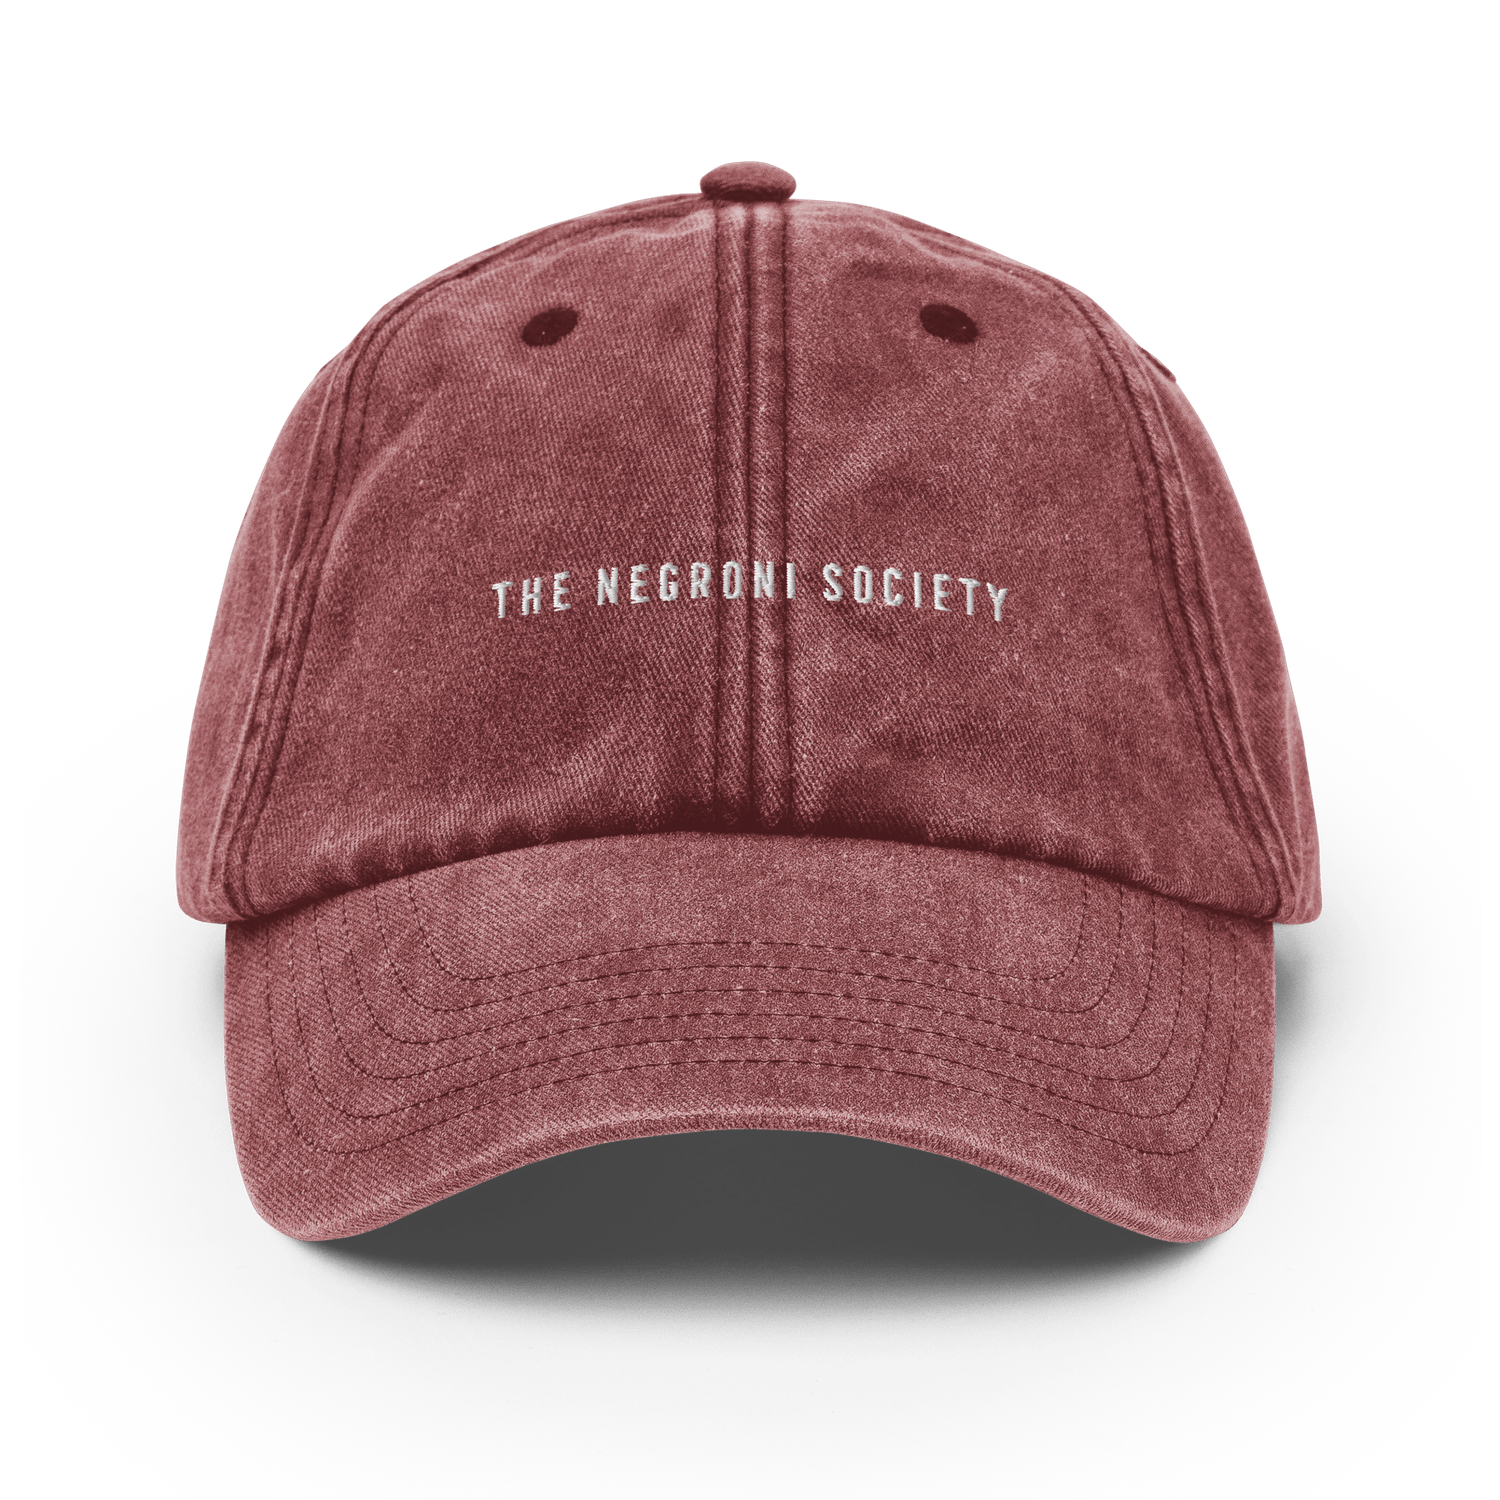 The Negroni Society "The Bar" Vintage Hat